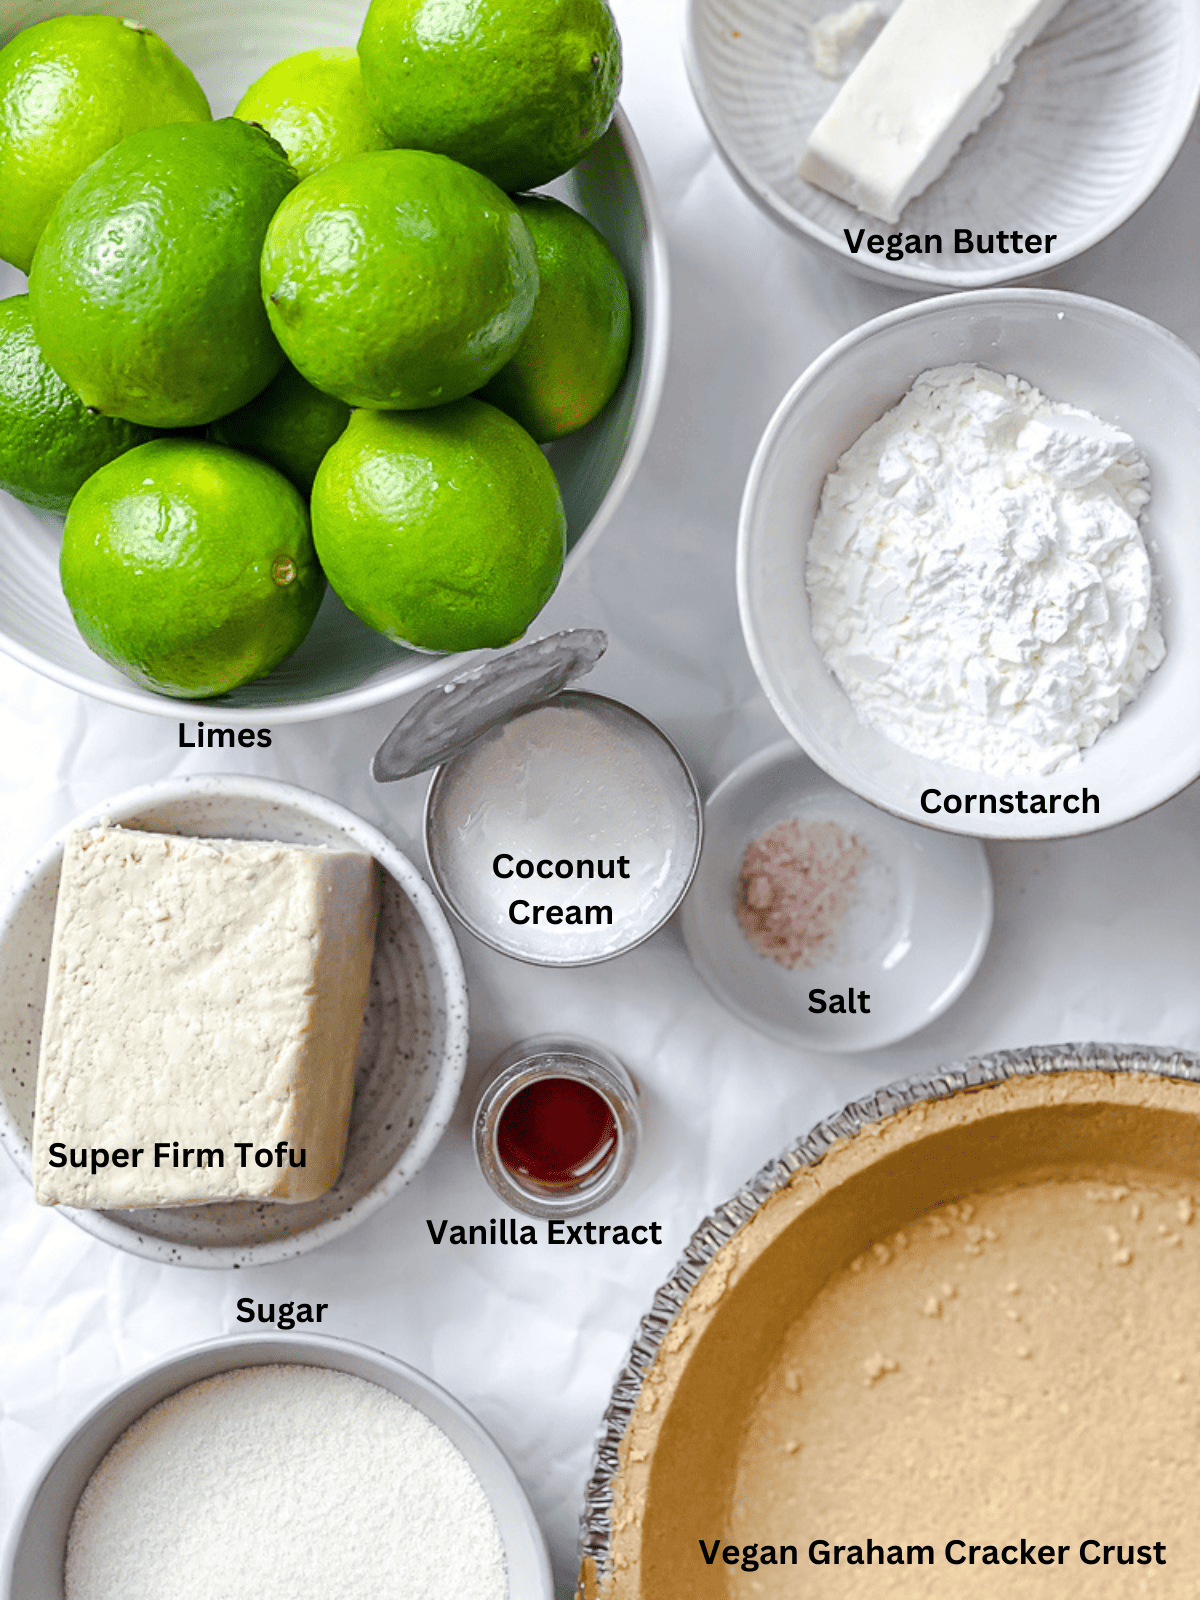 ingredients for Easy Vegan Key Lime Pie measured out